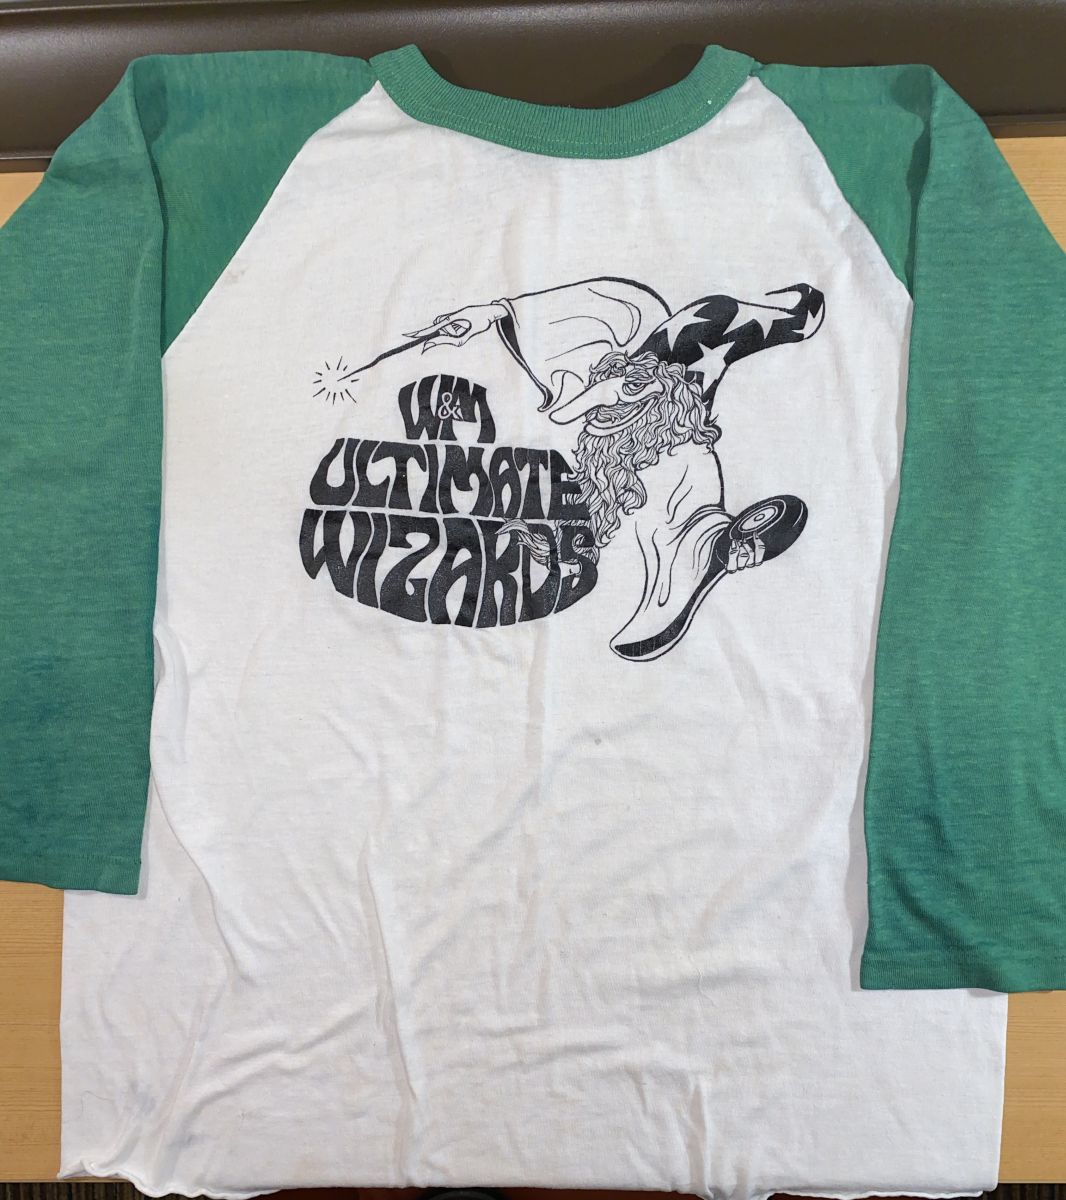 White Ultimate Frisbee jersey shirt with light green sleeves. In the center of the shirt is a black-and-white graphic of a wizard holding a wand in one hand and a frisbee in another. The shirt reads, "W&M / Ultimate / Wizards."